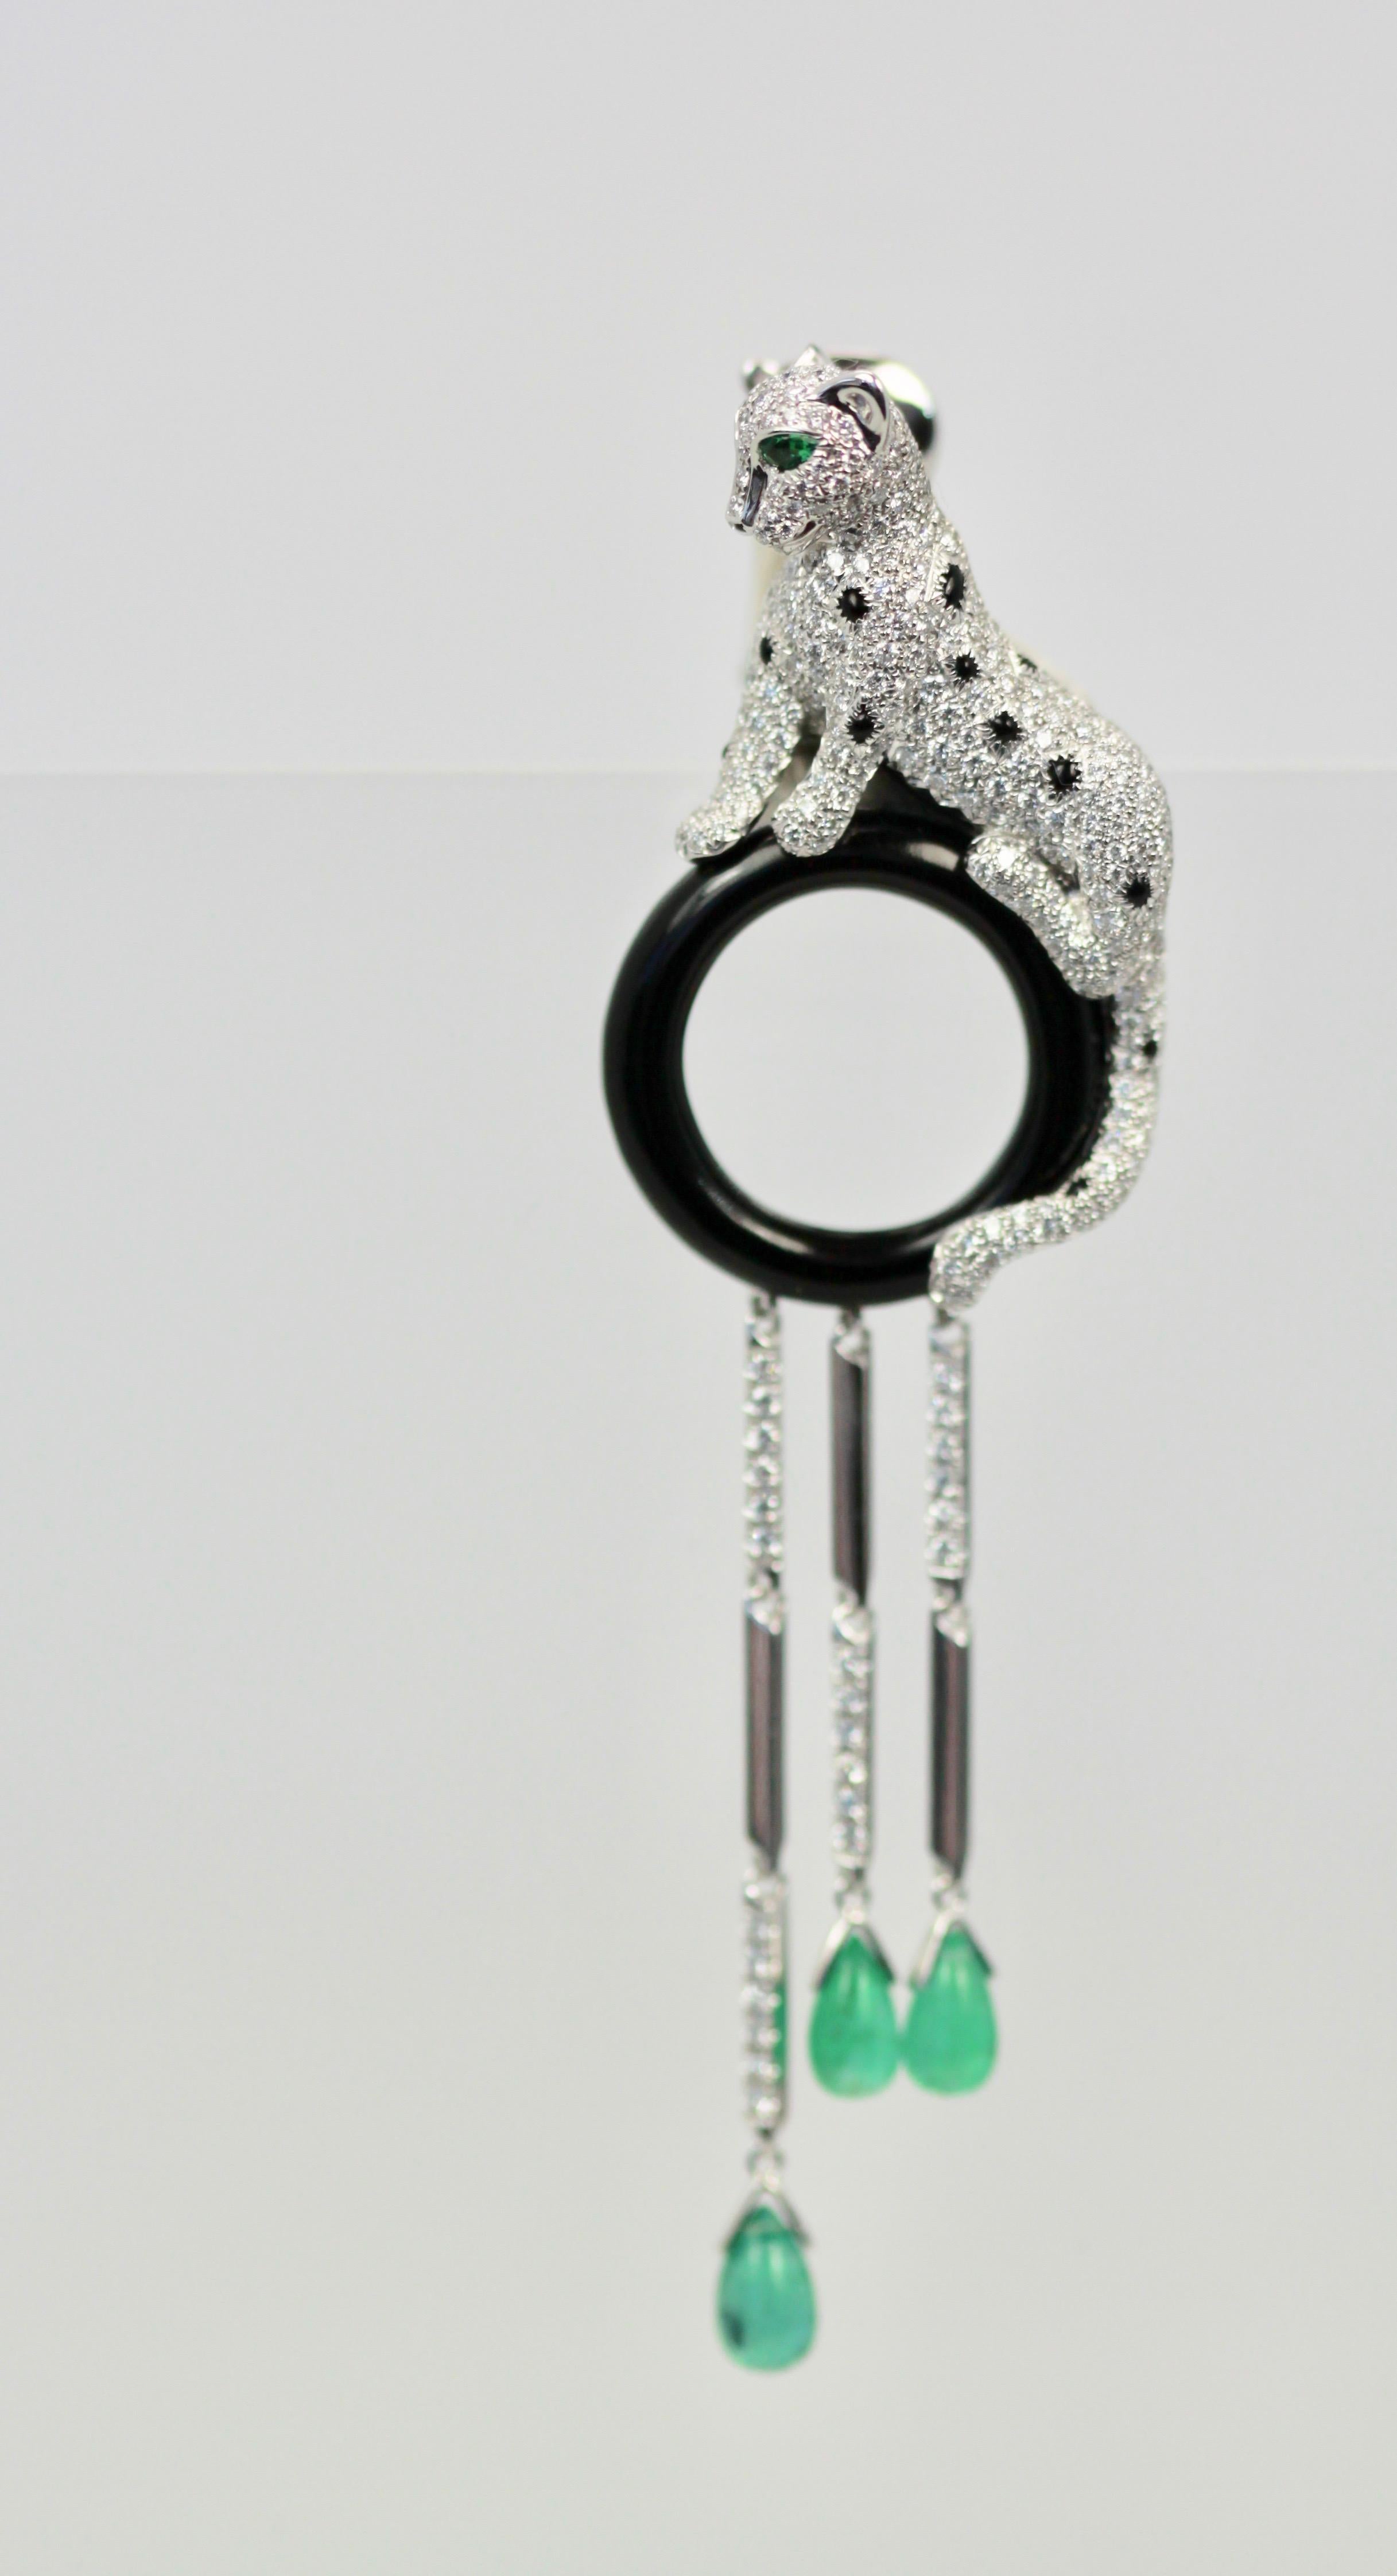 These Cartier Diamond Panthere earrings with Onyx and Emeralds are 